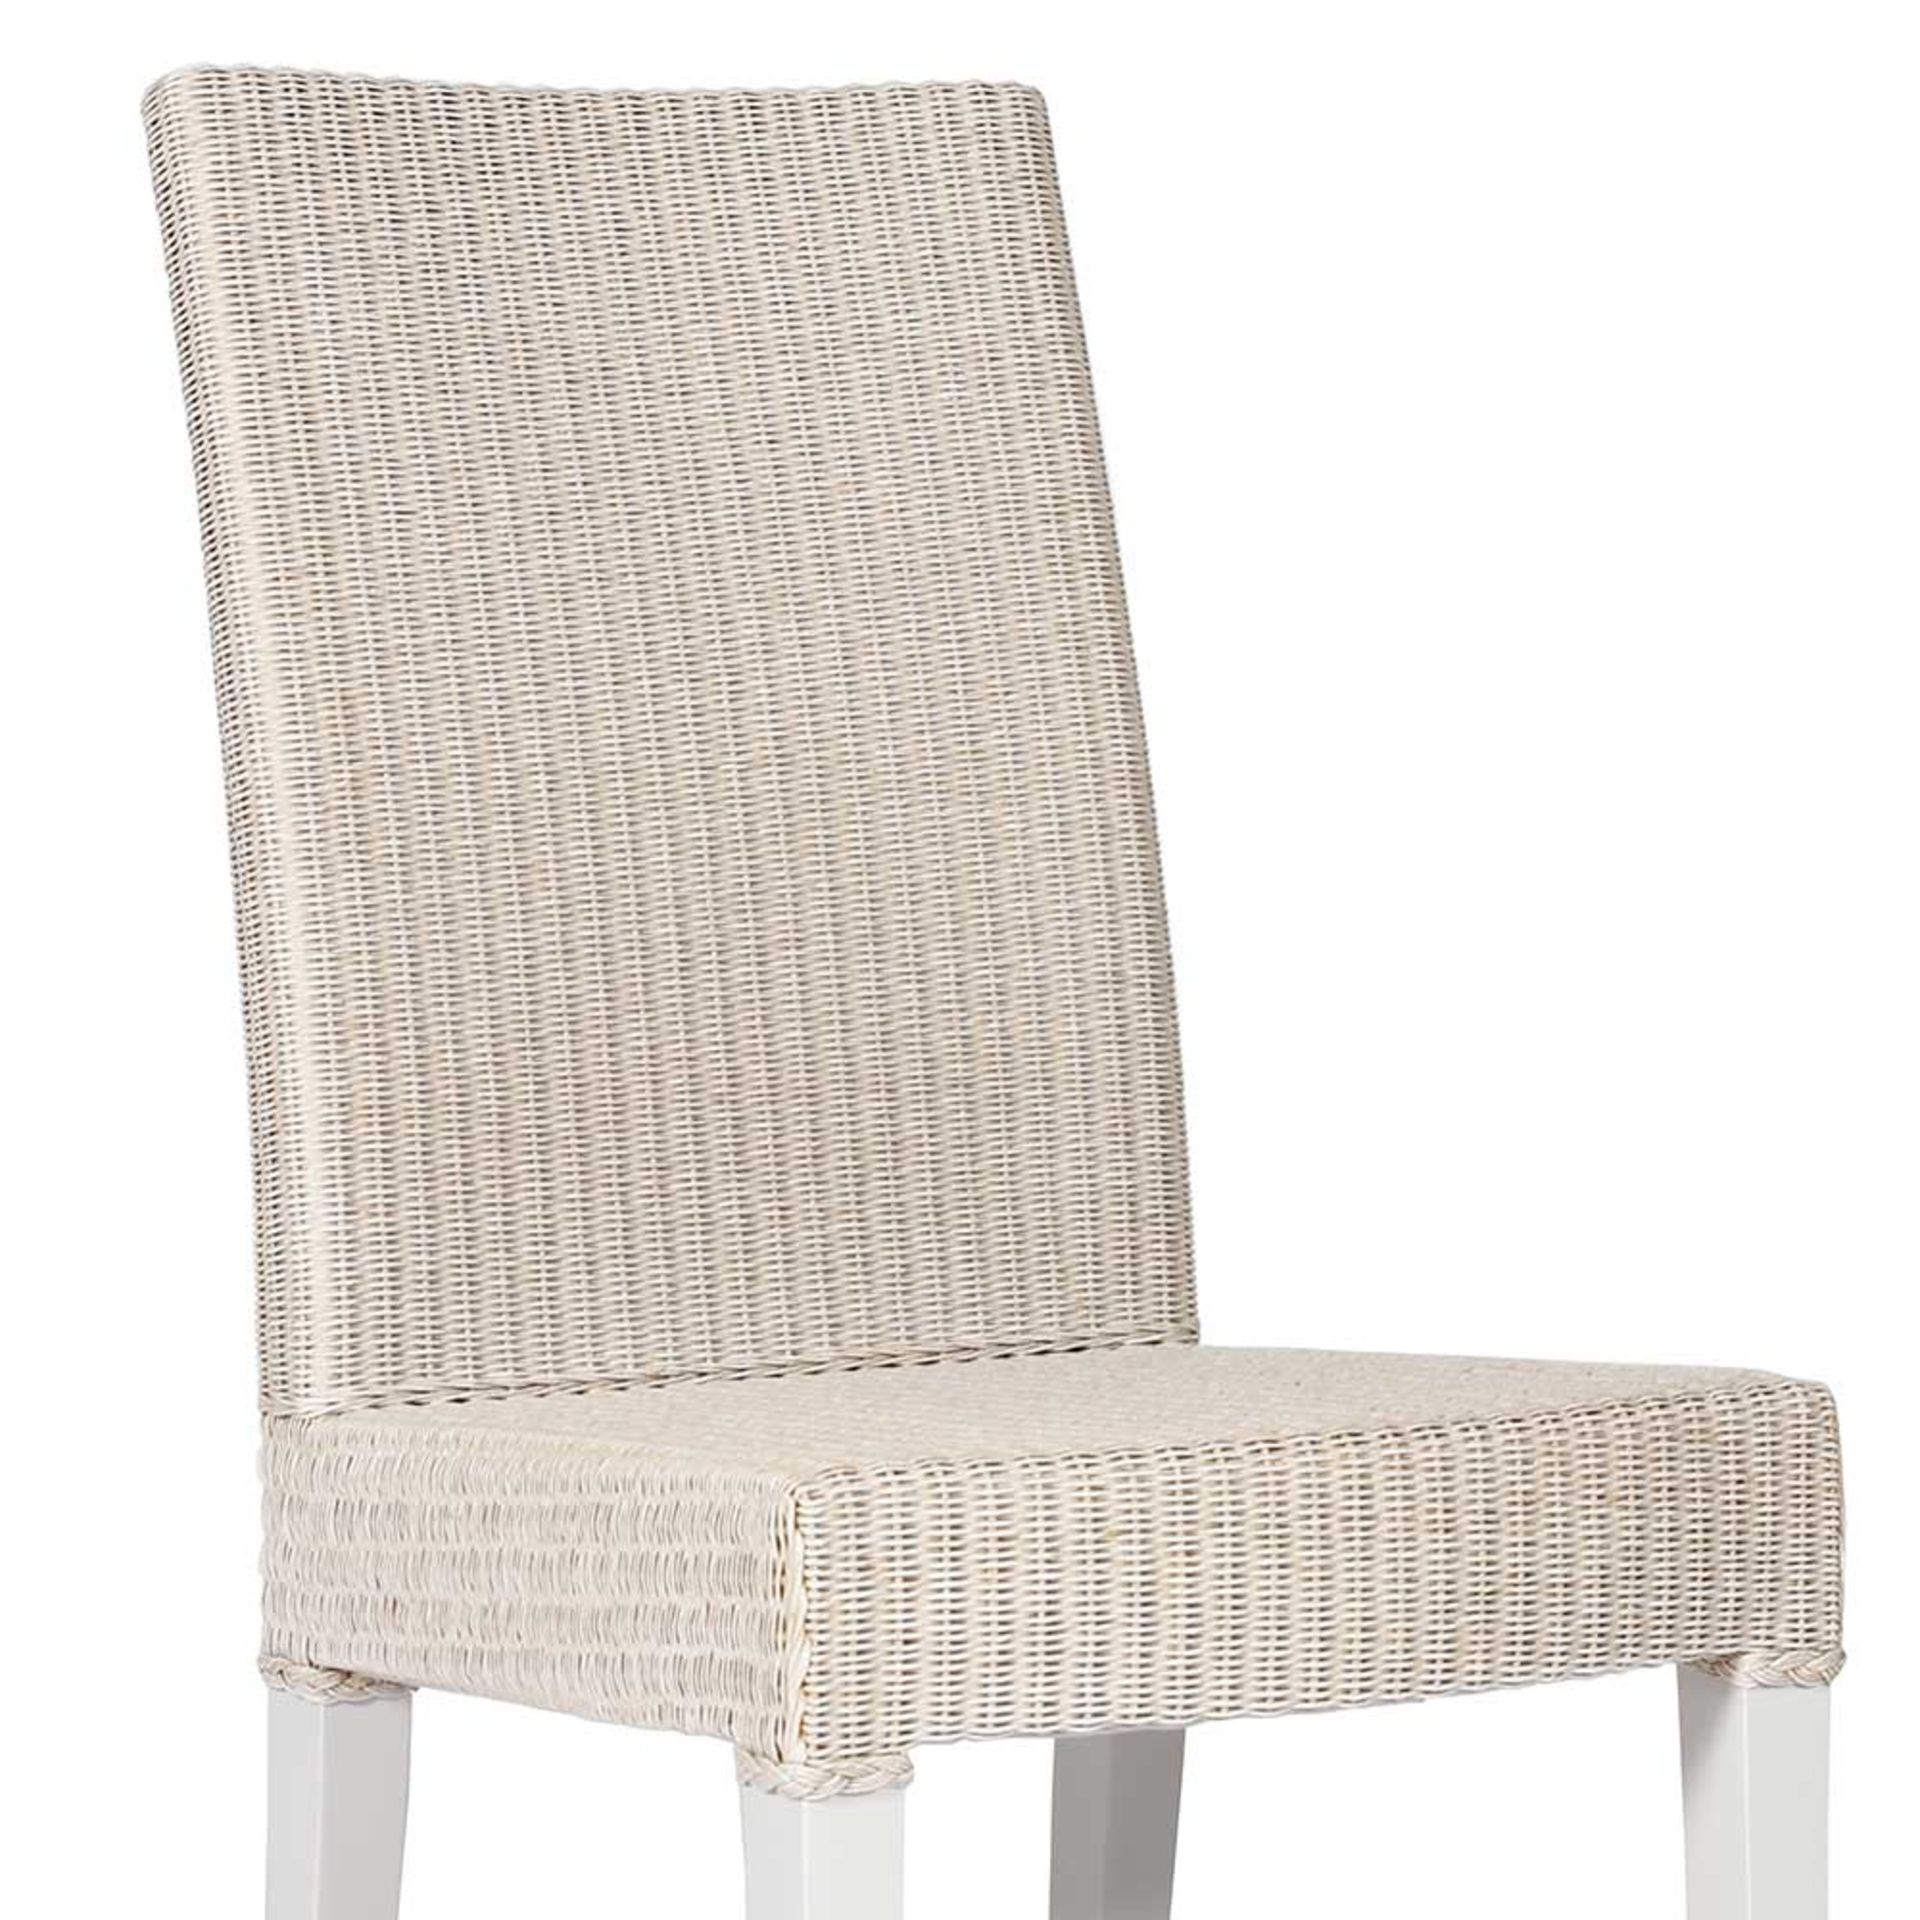 4 x Lina Two Tone Lloyd Loom Woven Dining Chairs - Contemporary Dining Chair Set - RRP £792! - Image 5 of 7